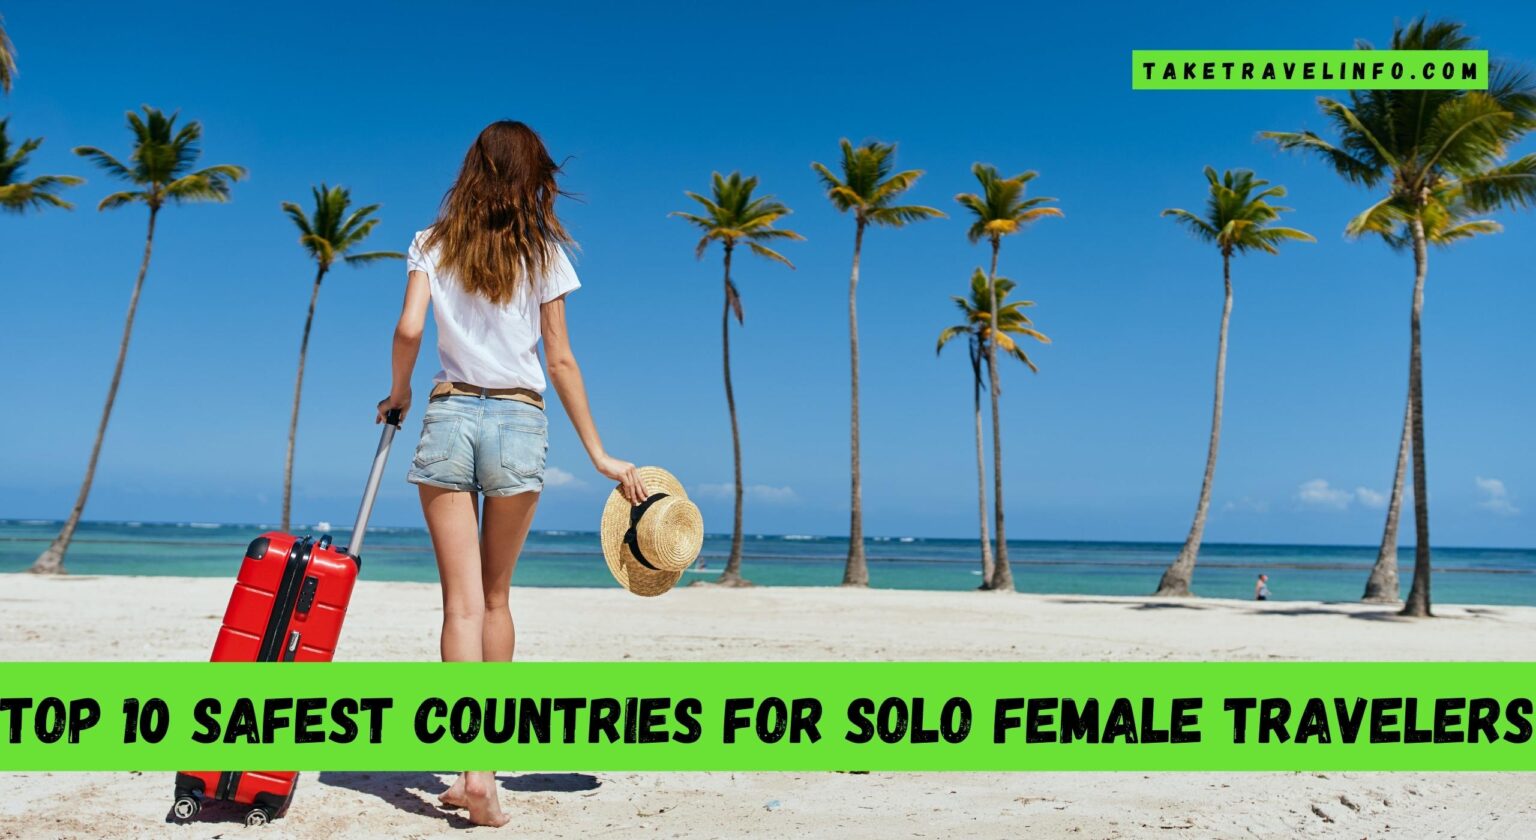 Top Safest Countries For Solo Female Travelers